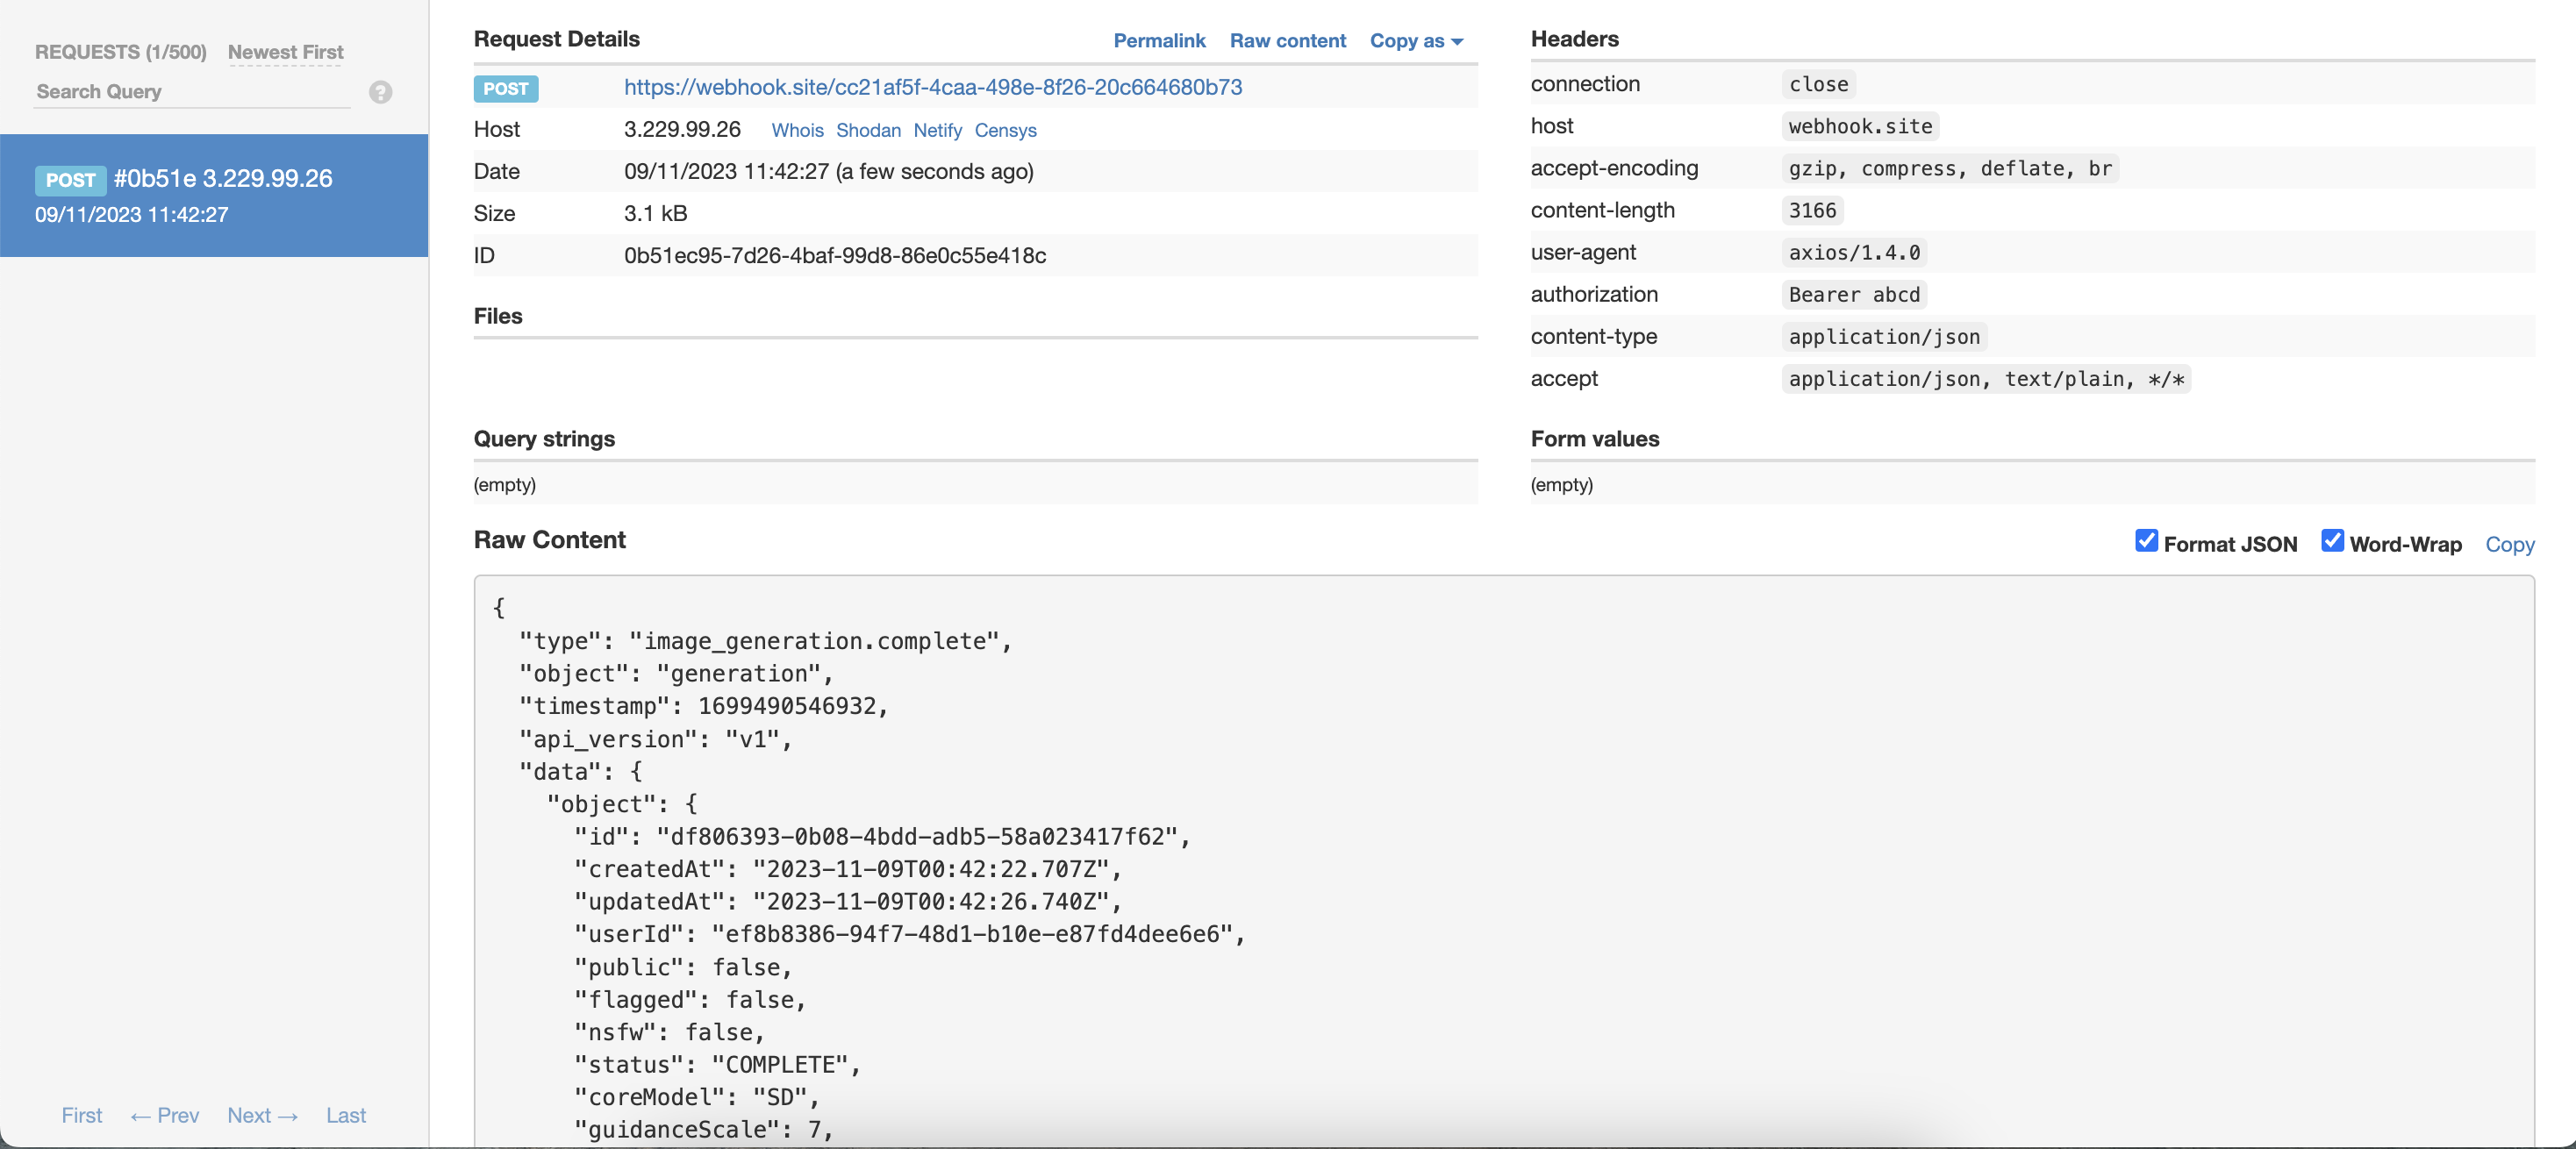 Sample screenshot for an online tool (Webhook.site) for examining HTTP requests.